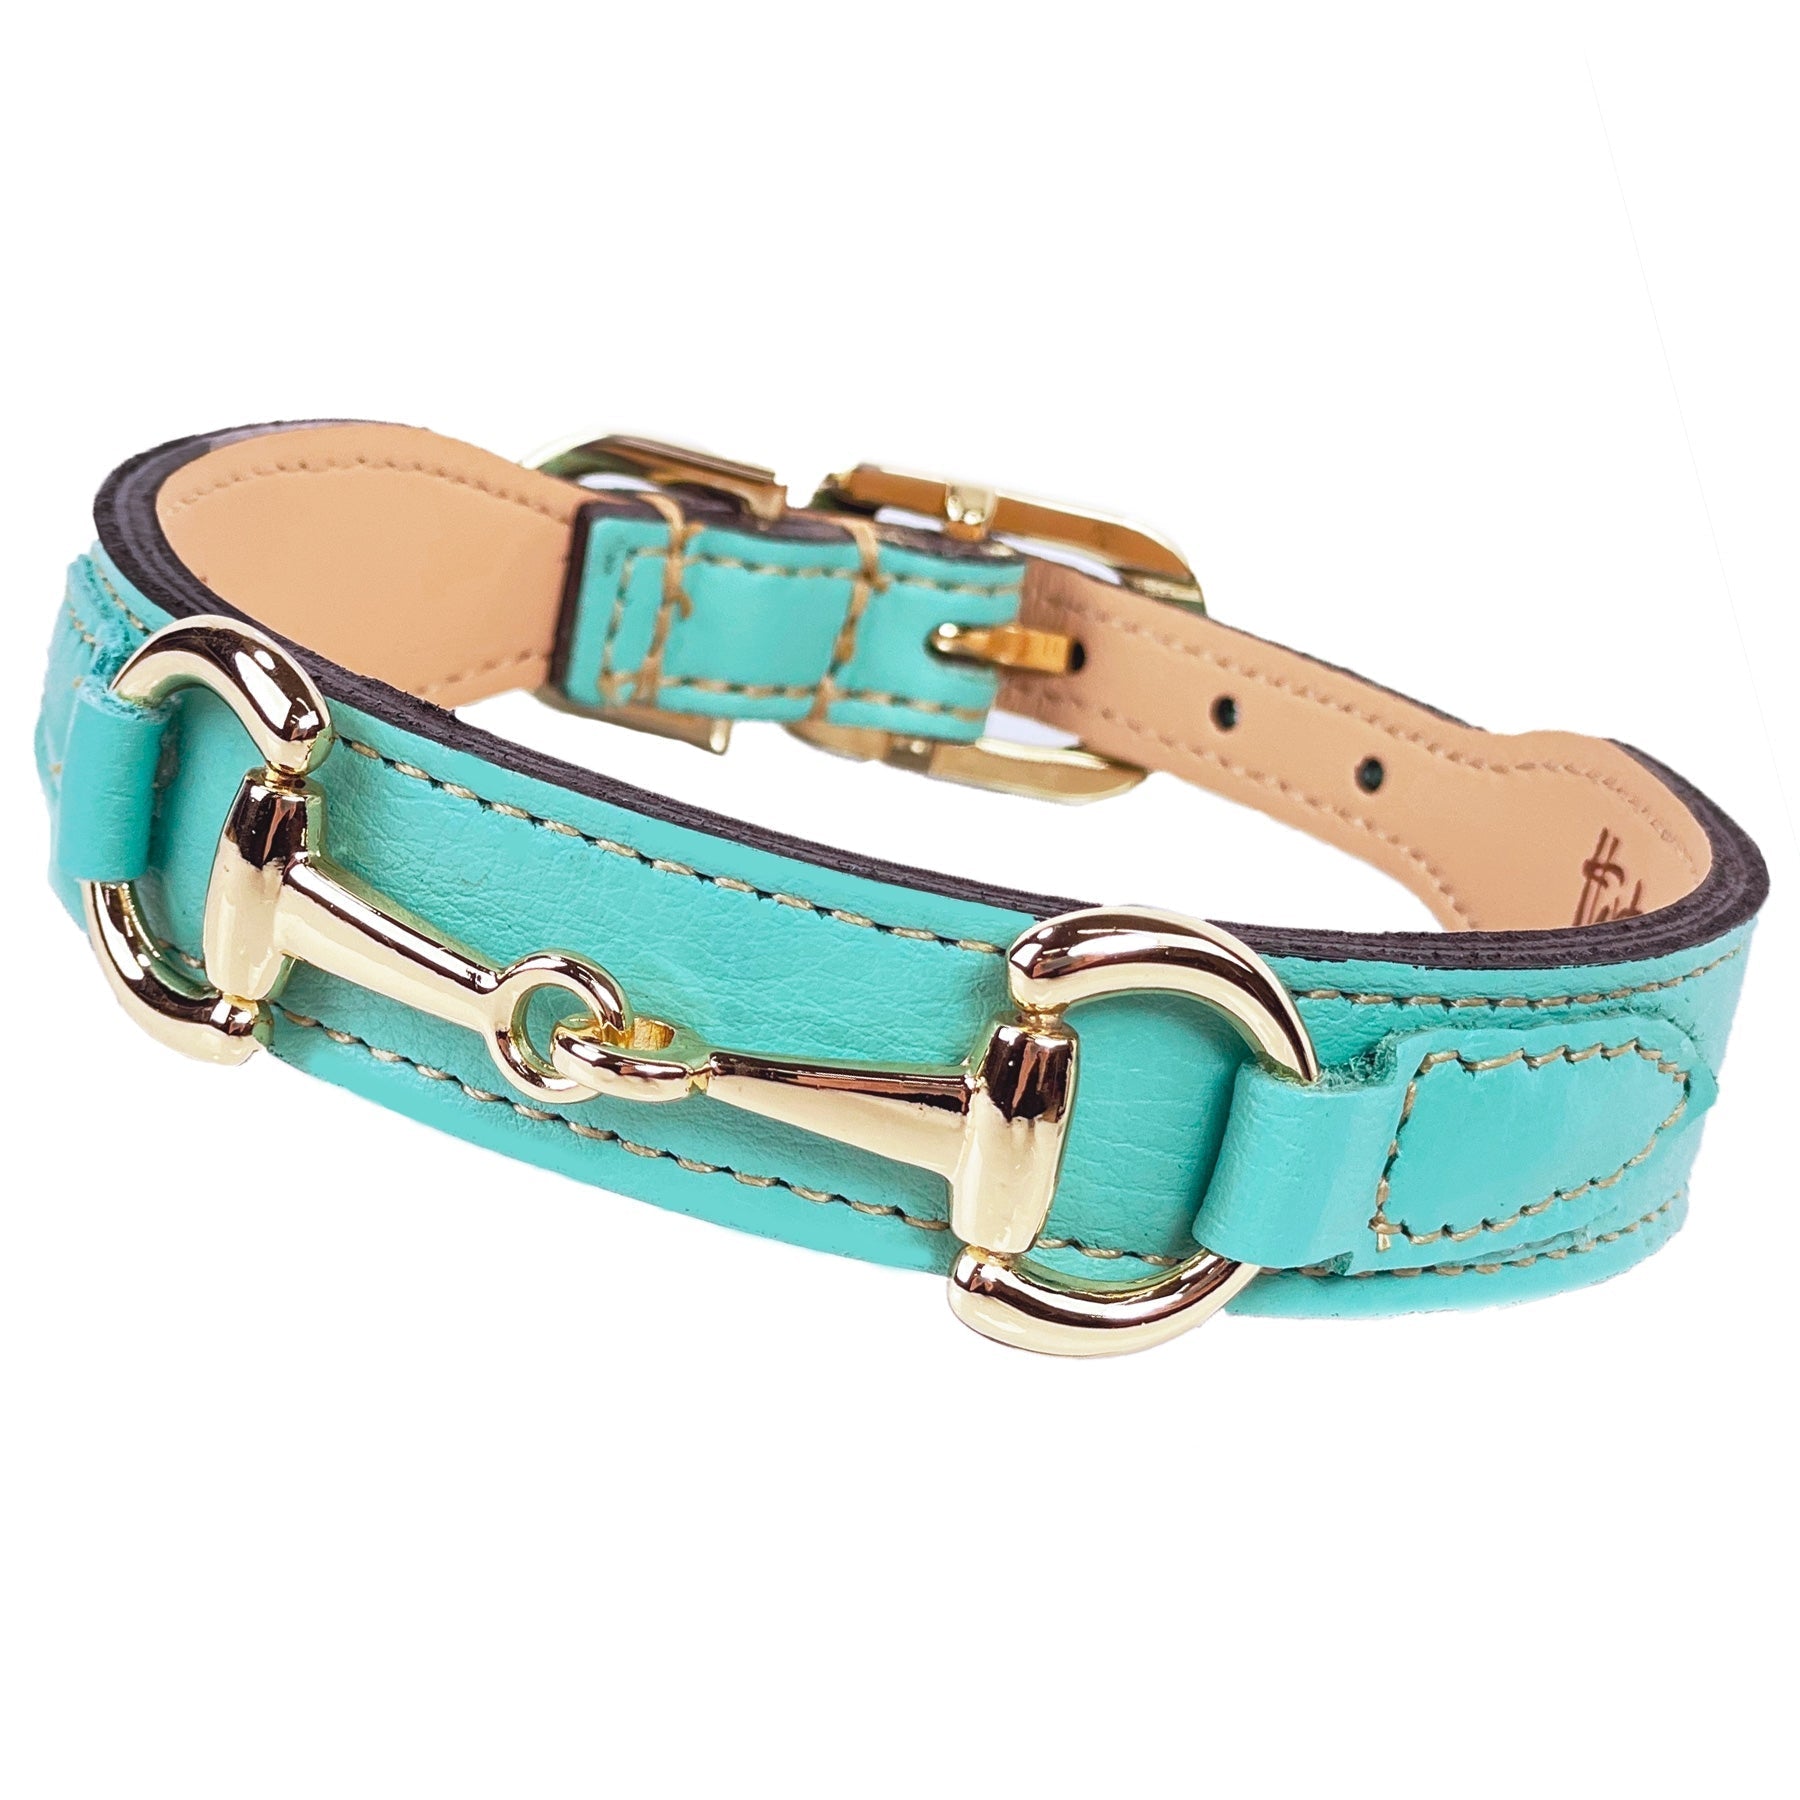 Belmont in Turquoise & Gold